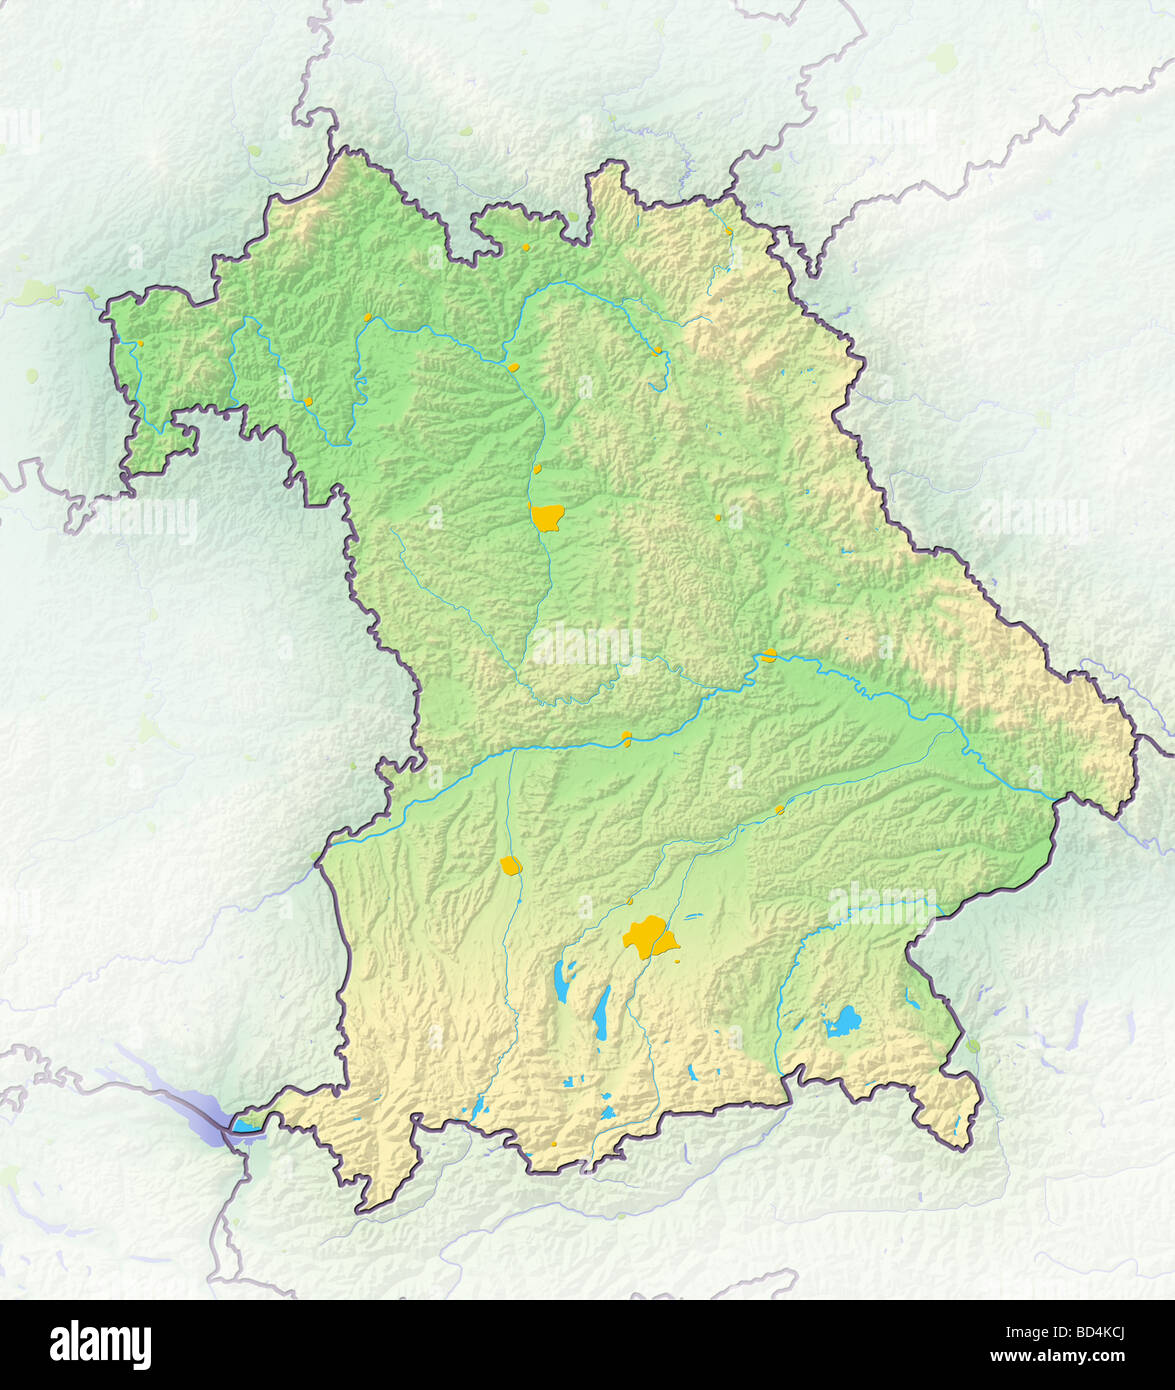 Bavaria, shaded relief map. Stock Photo